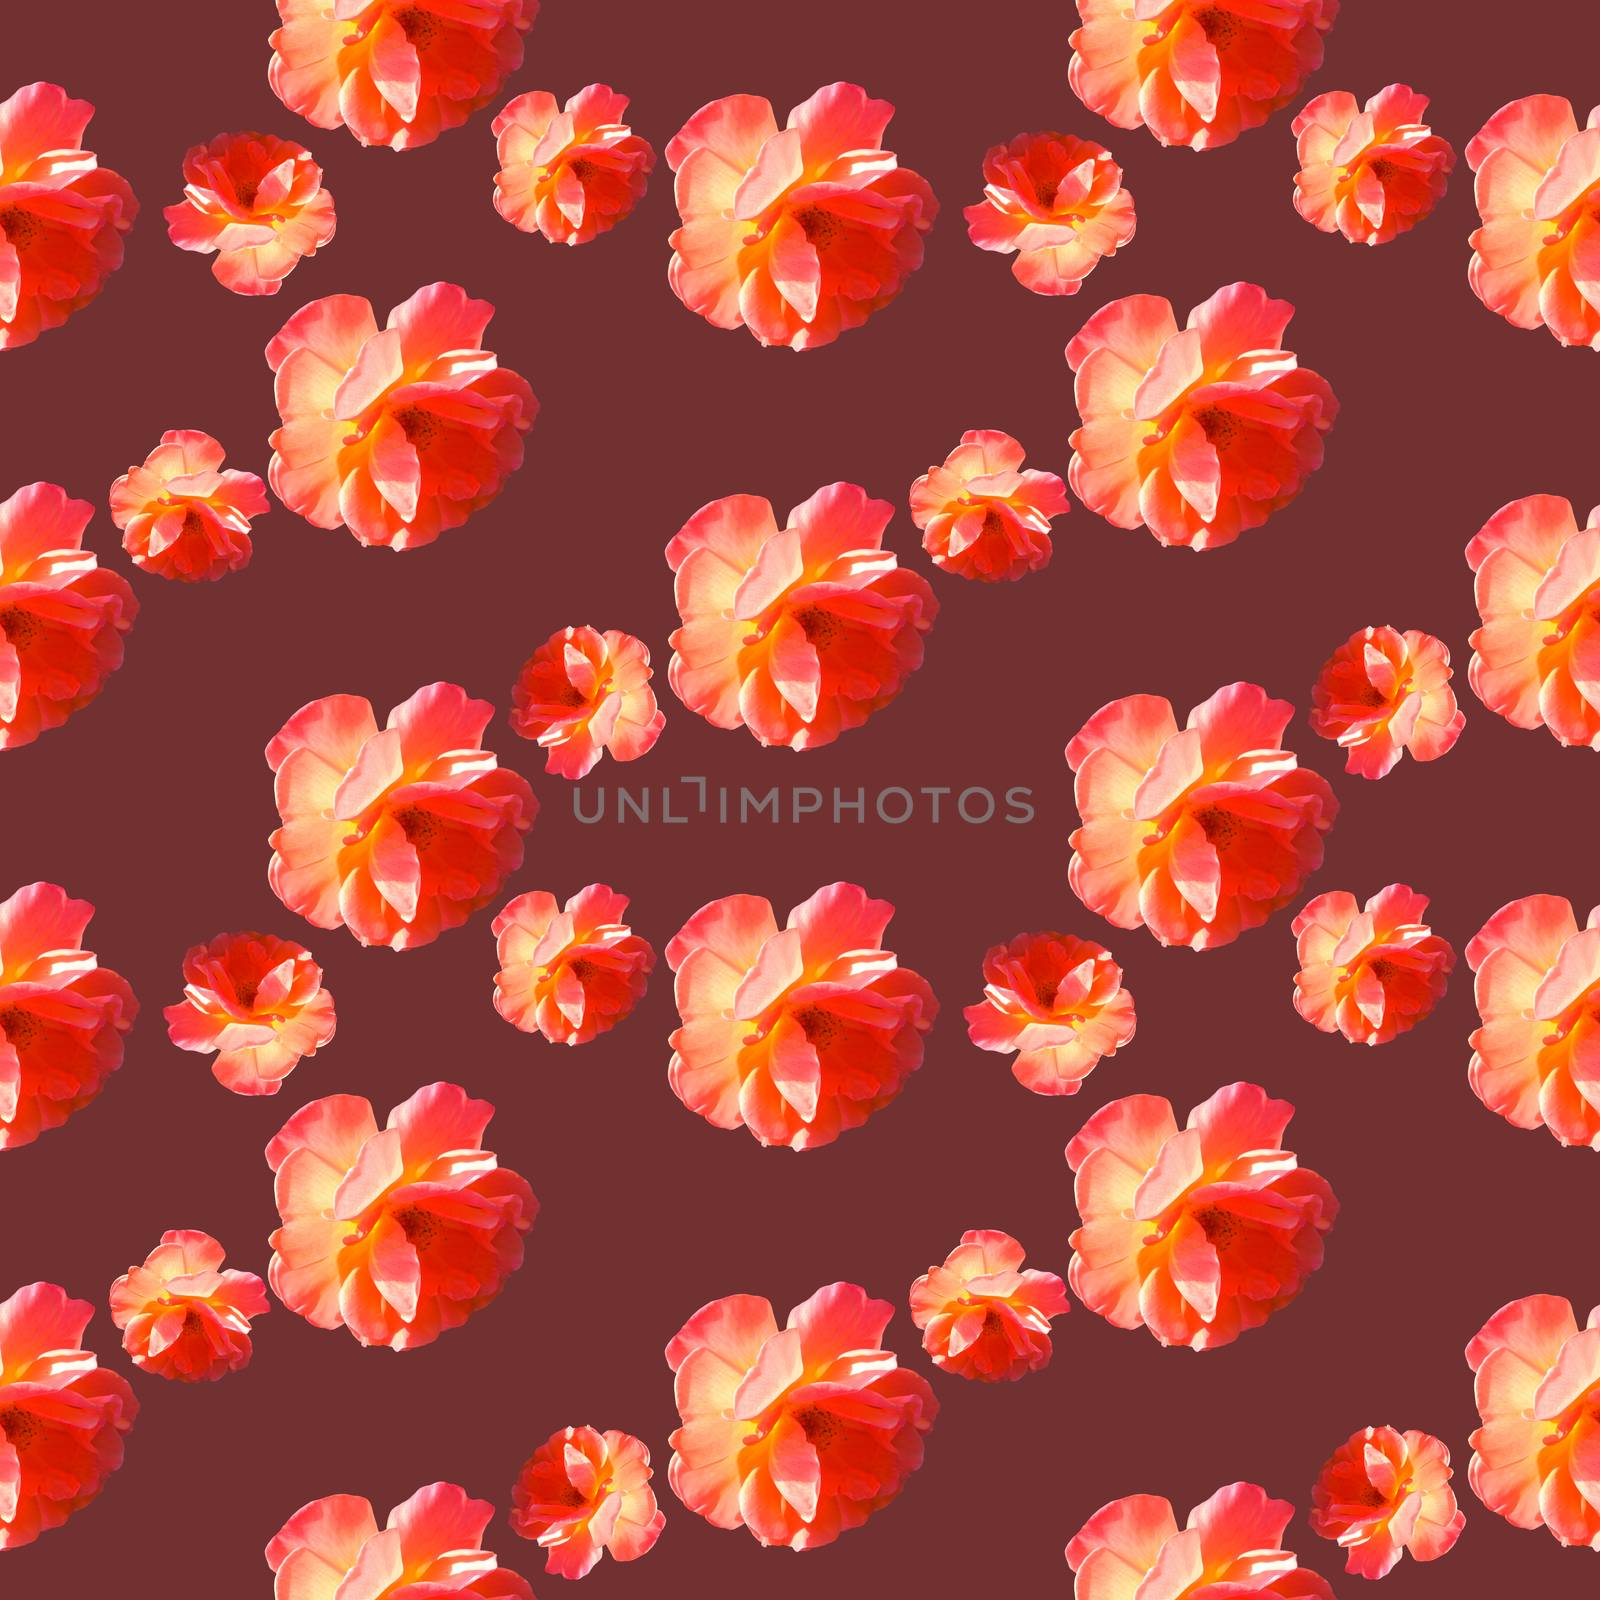 Seamless pattern with roses on a burgundy background. Flat lay, top view. Pop art creative design for textile, fashion, wallpaper, fabric, wrapping paper.